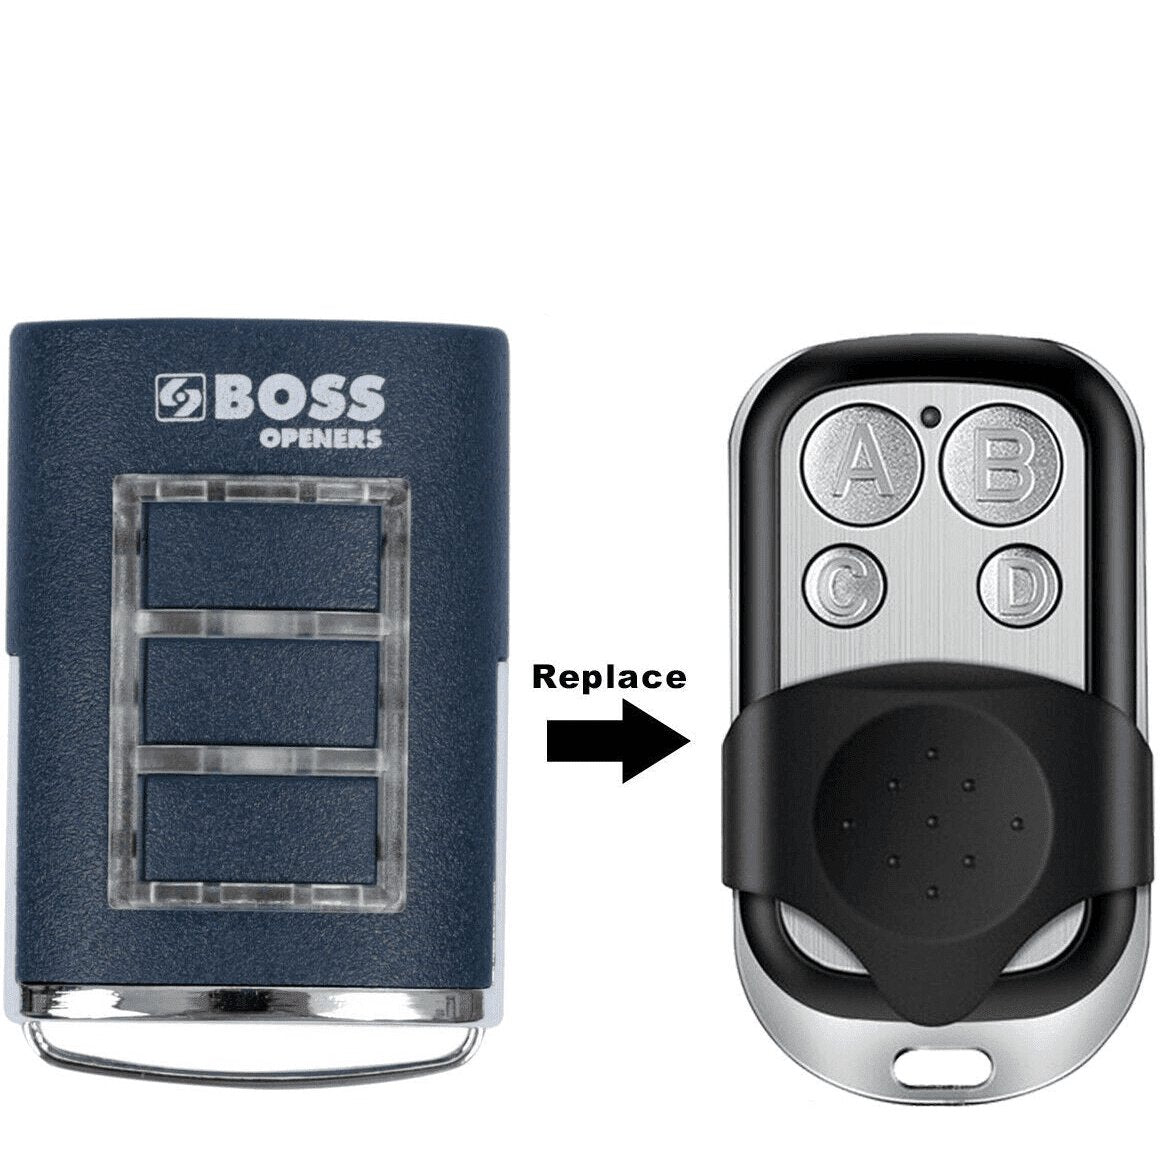 Boss Replacement Compatible For Remote Garage BHT3/BHT-3/HT3/BOSS6 433MHz BOL4/BOL6/OL4 - Office Catch